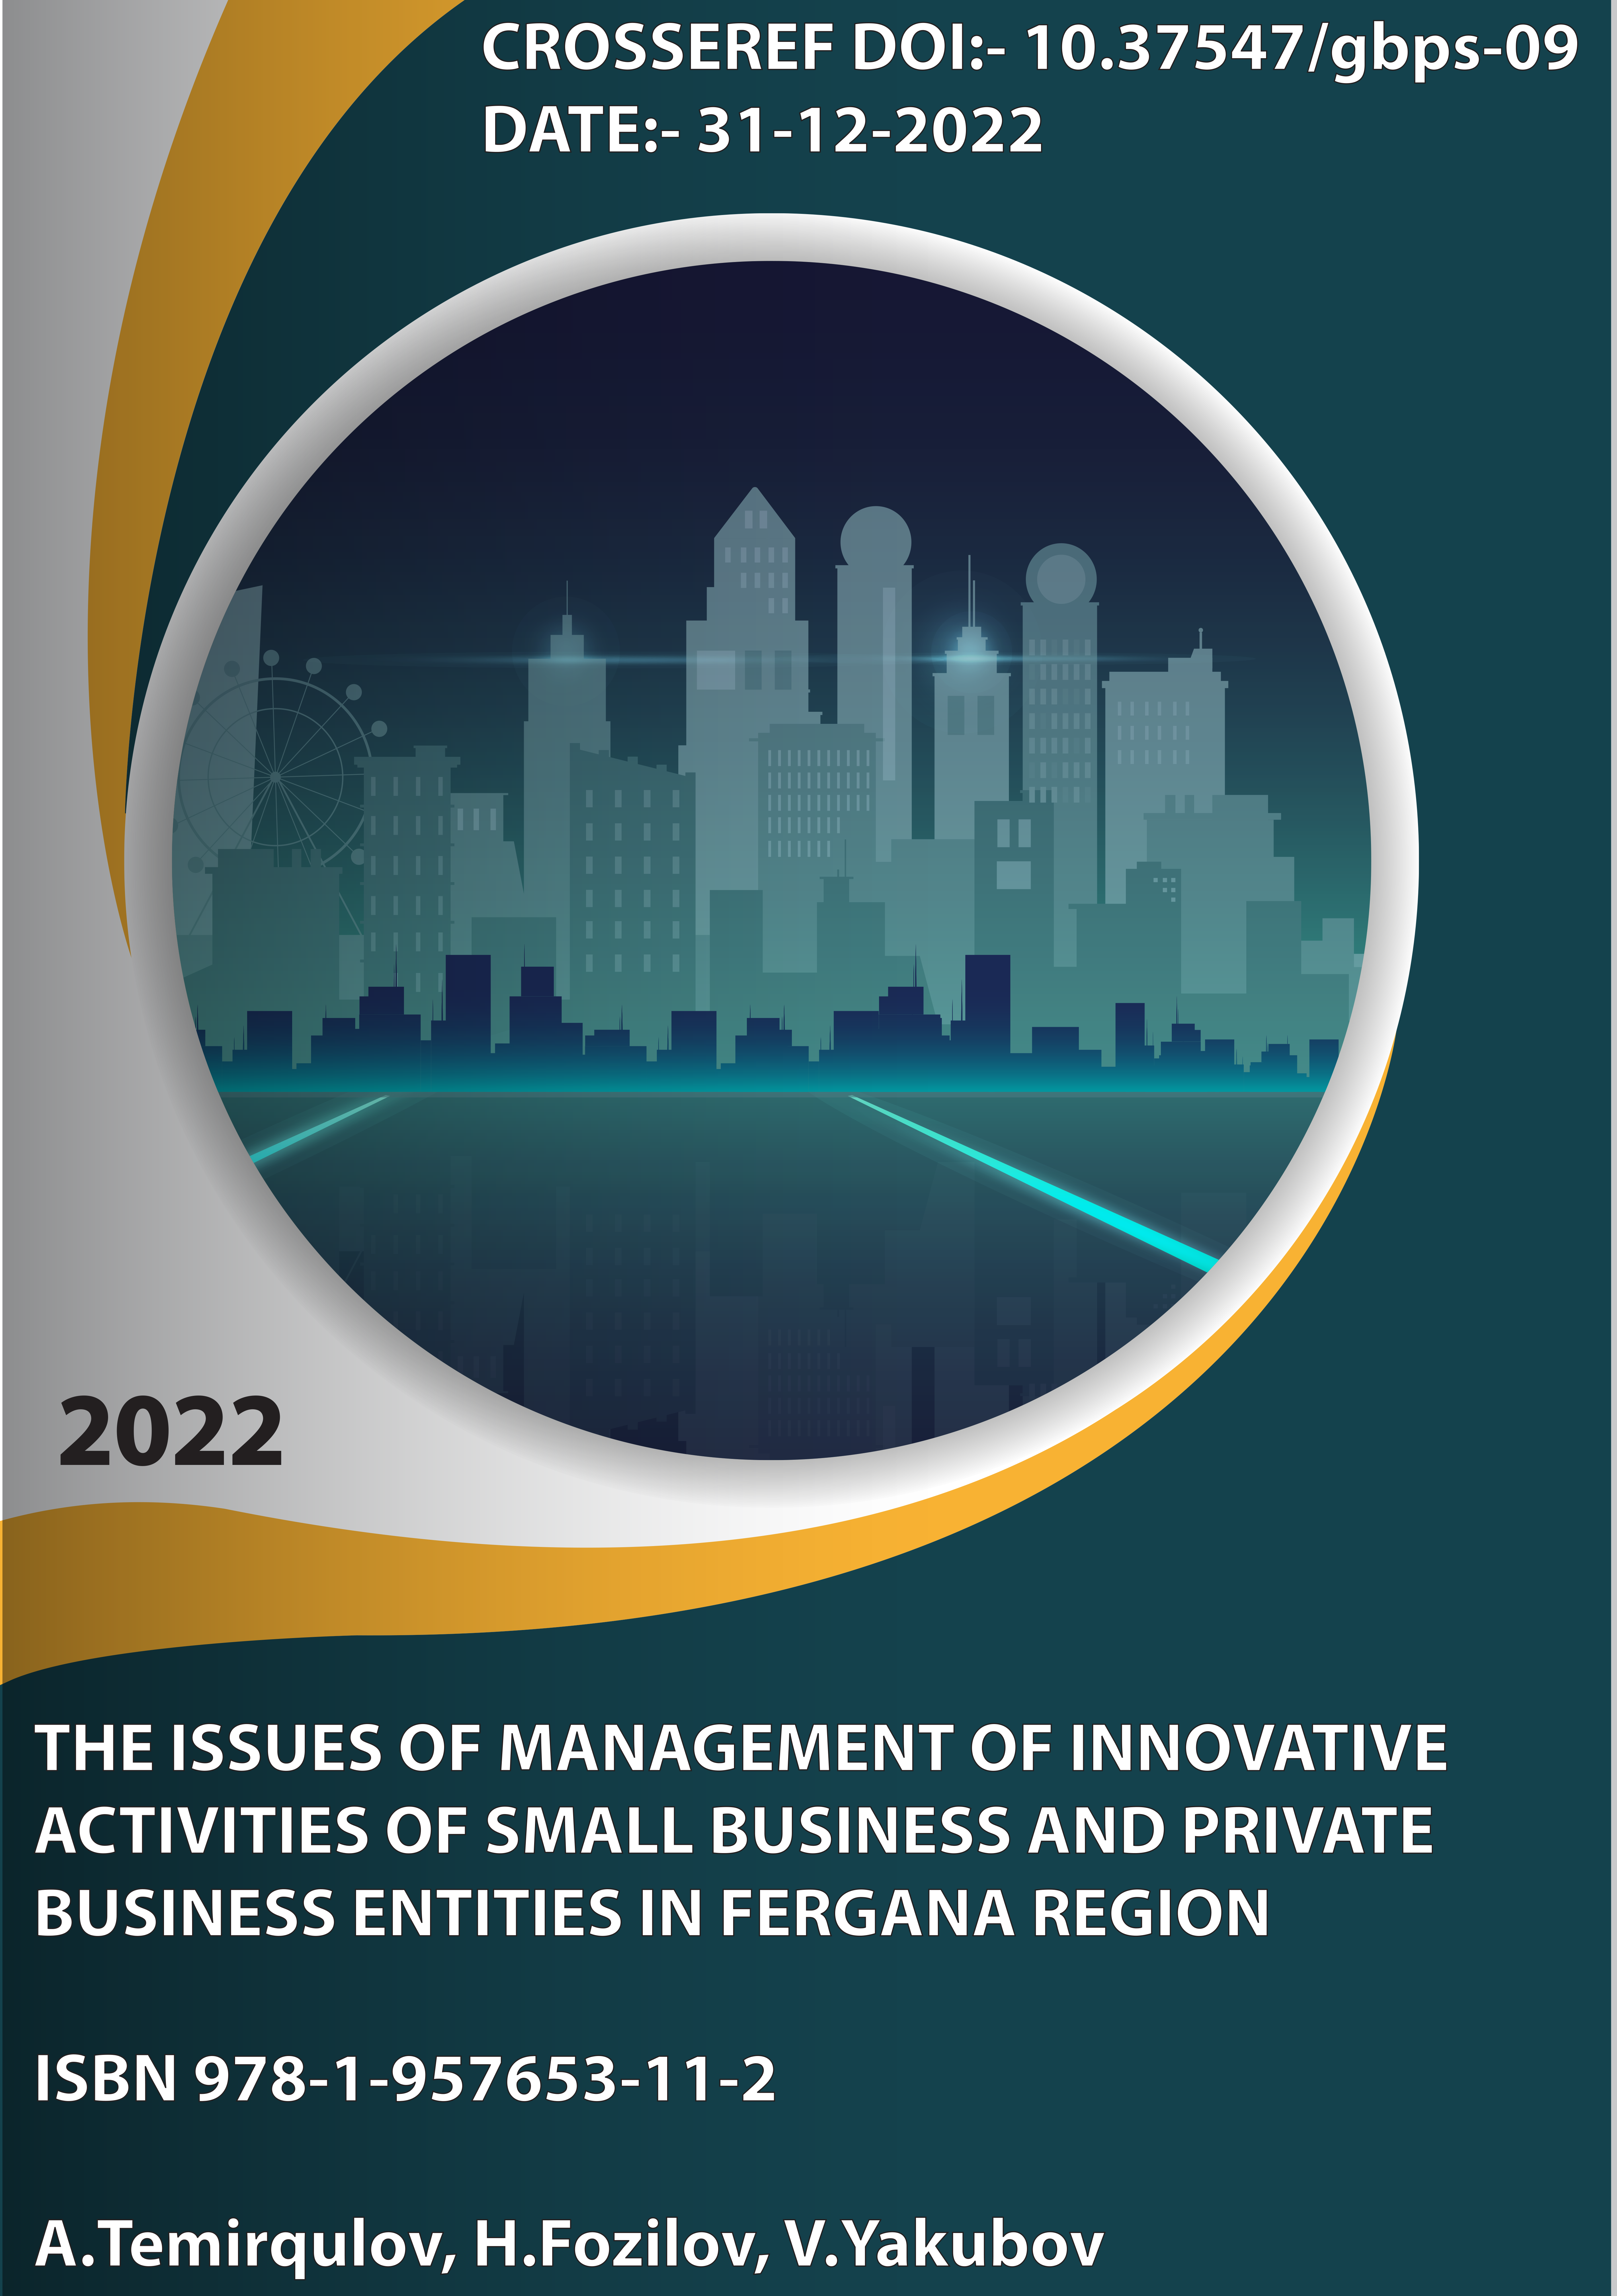 					View THE ISSUES OF MANAGEMENT OF INNOVATIVE ACTIVITIES OF SMALL BUSINESS AND PRIVATE BUSINESS ENTITIES IN FERGANA REGION
				